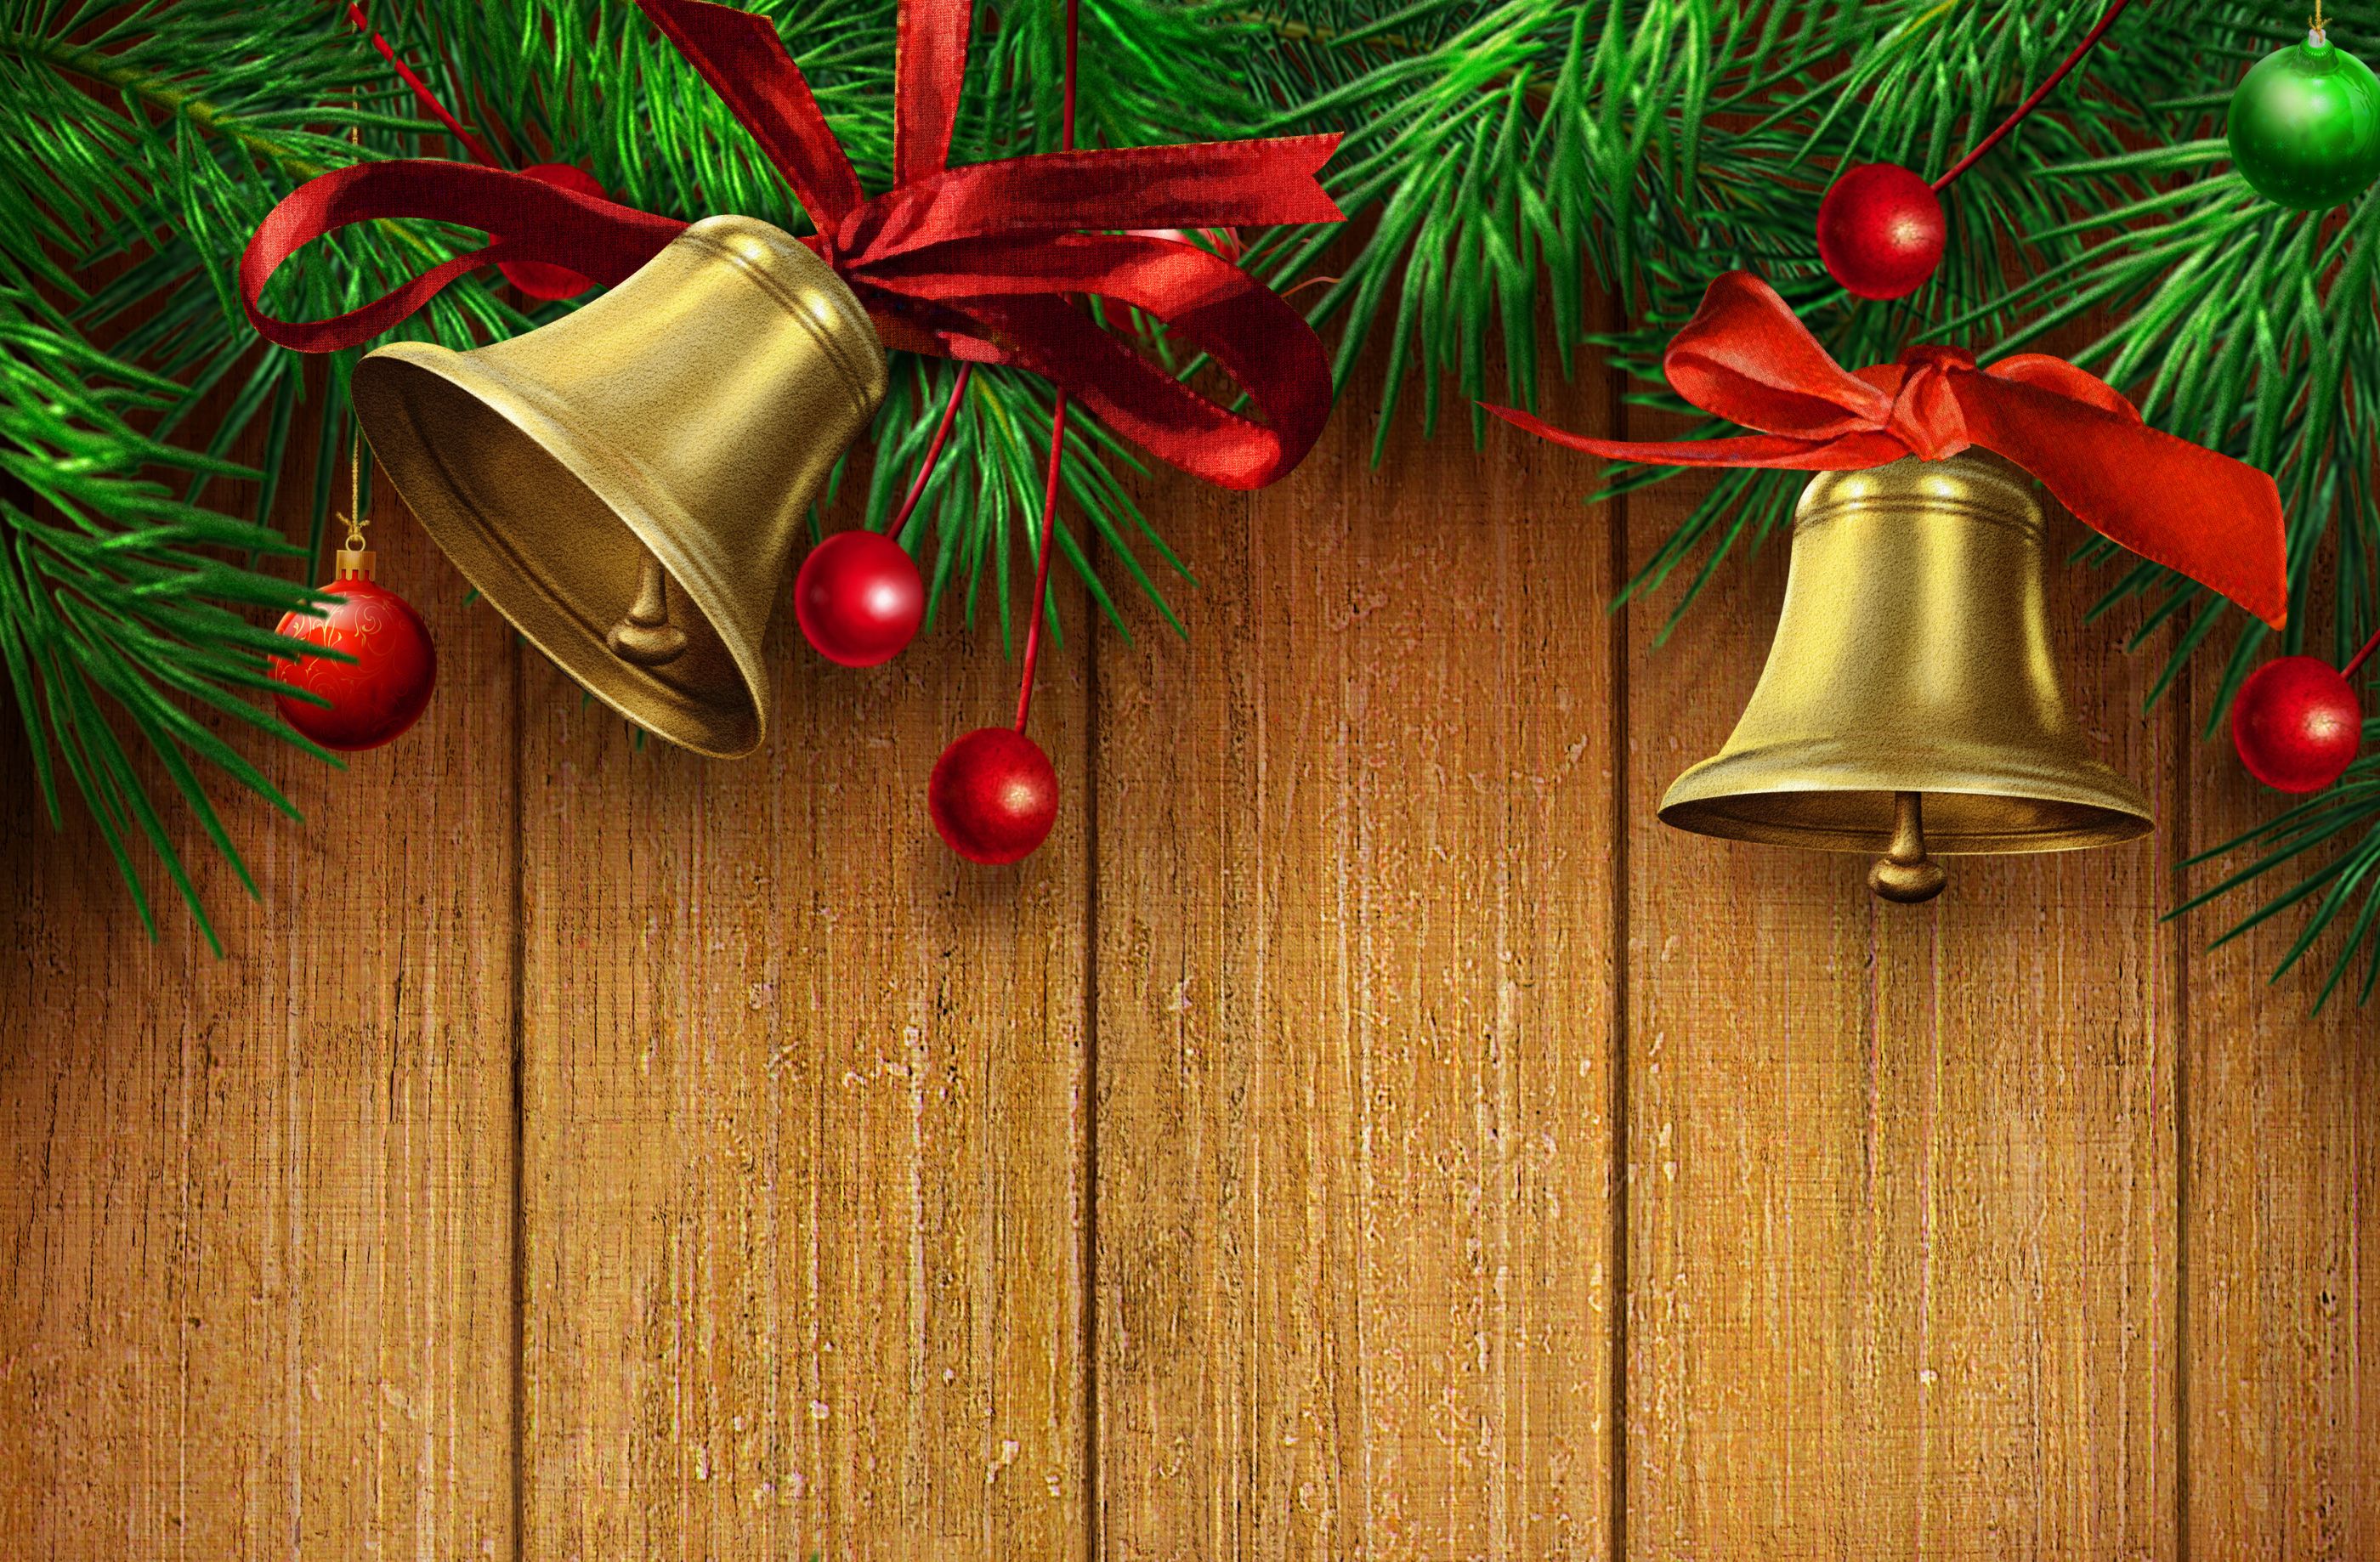 Christmas Wooden Background With Gold Bells And Red Ribbon